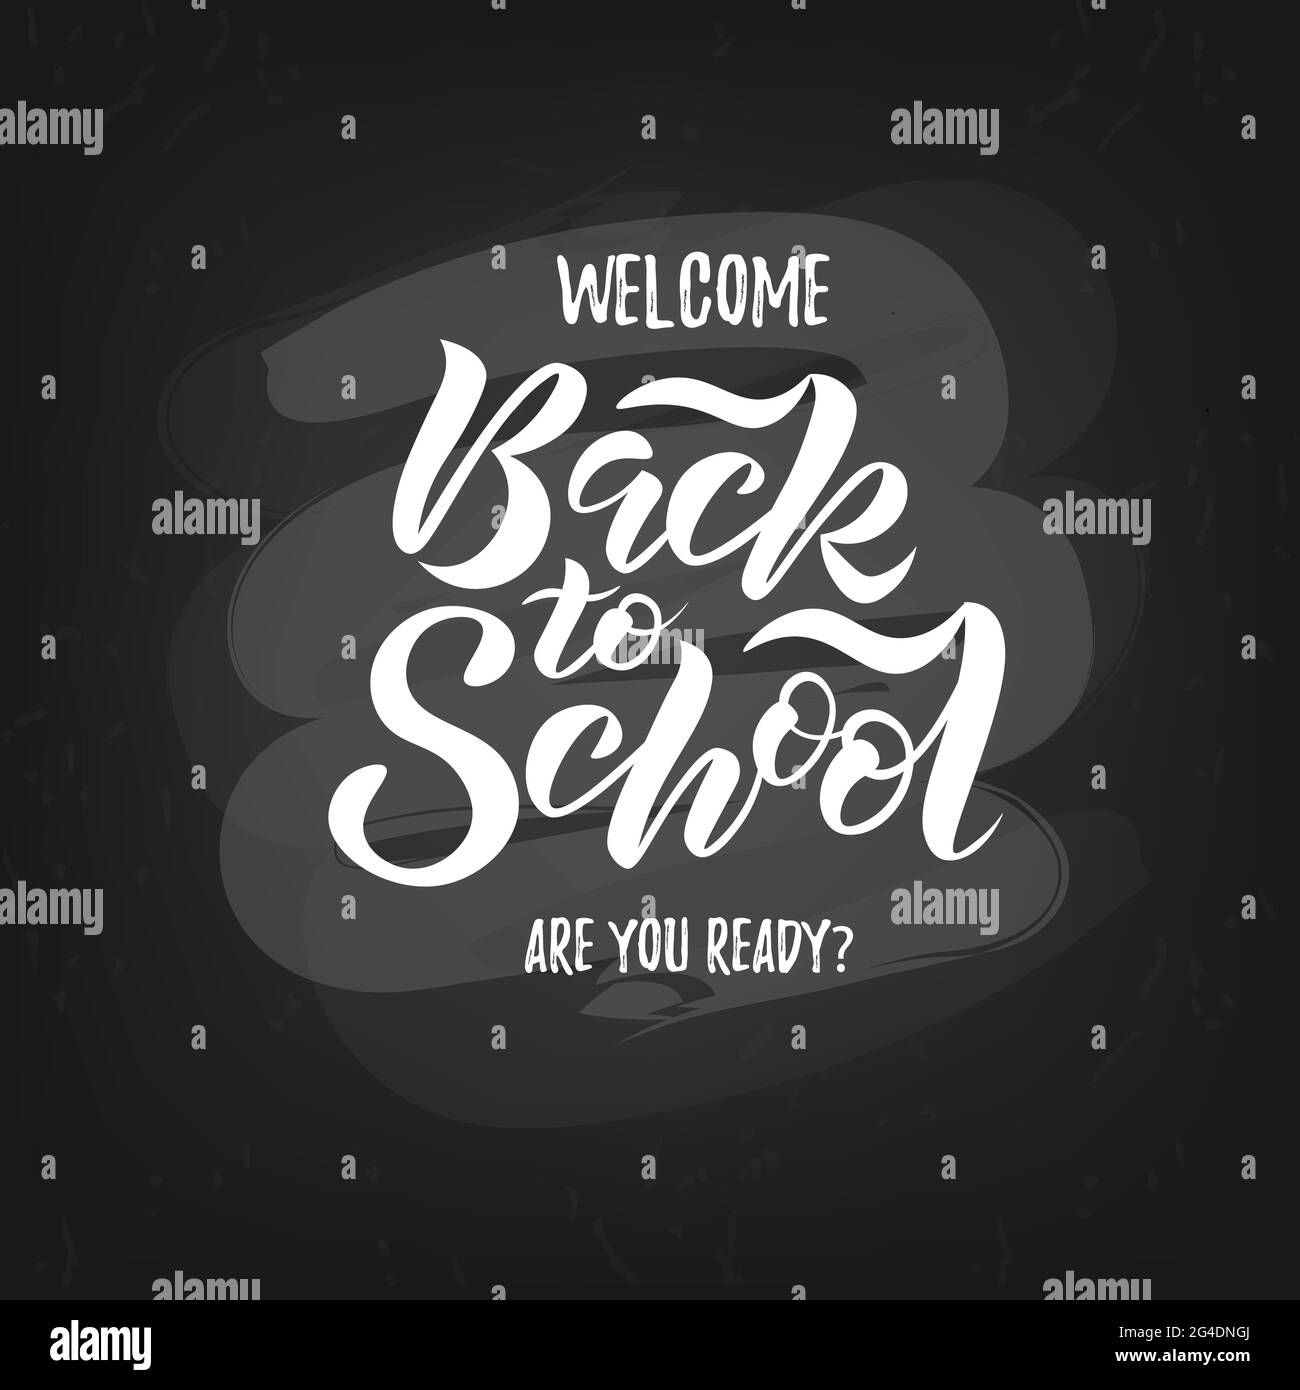 Back to school cute funny text with school supplies and educational elements. Concept design, banner, card, greeting. Vector illustration. Stock Vector